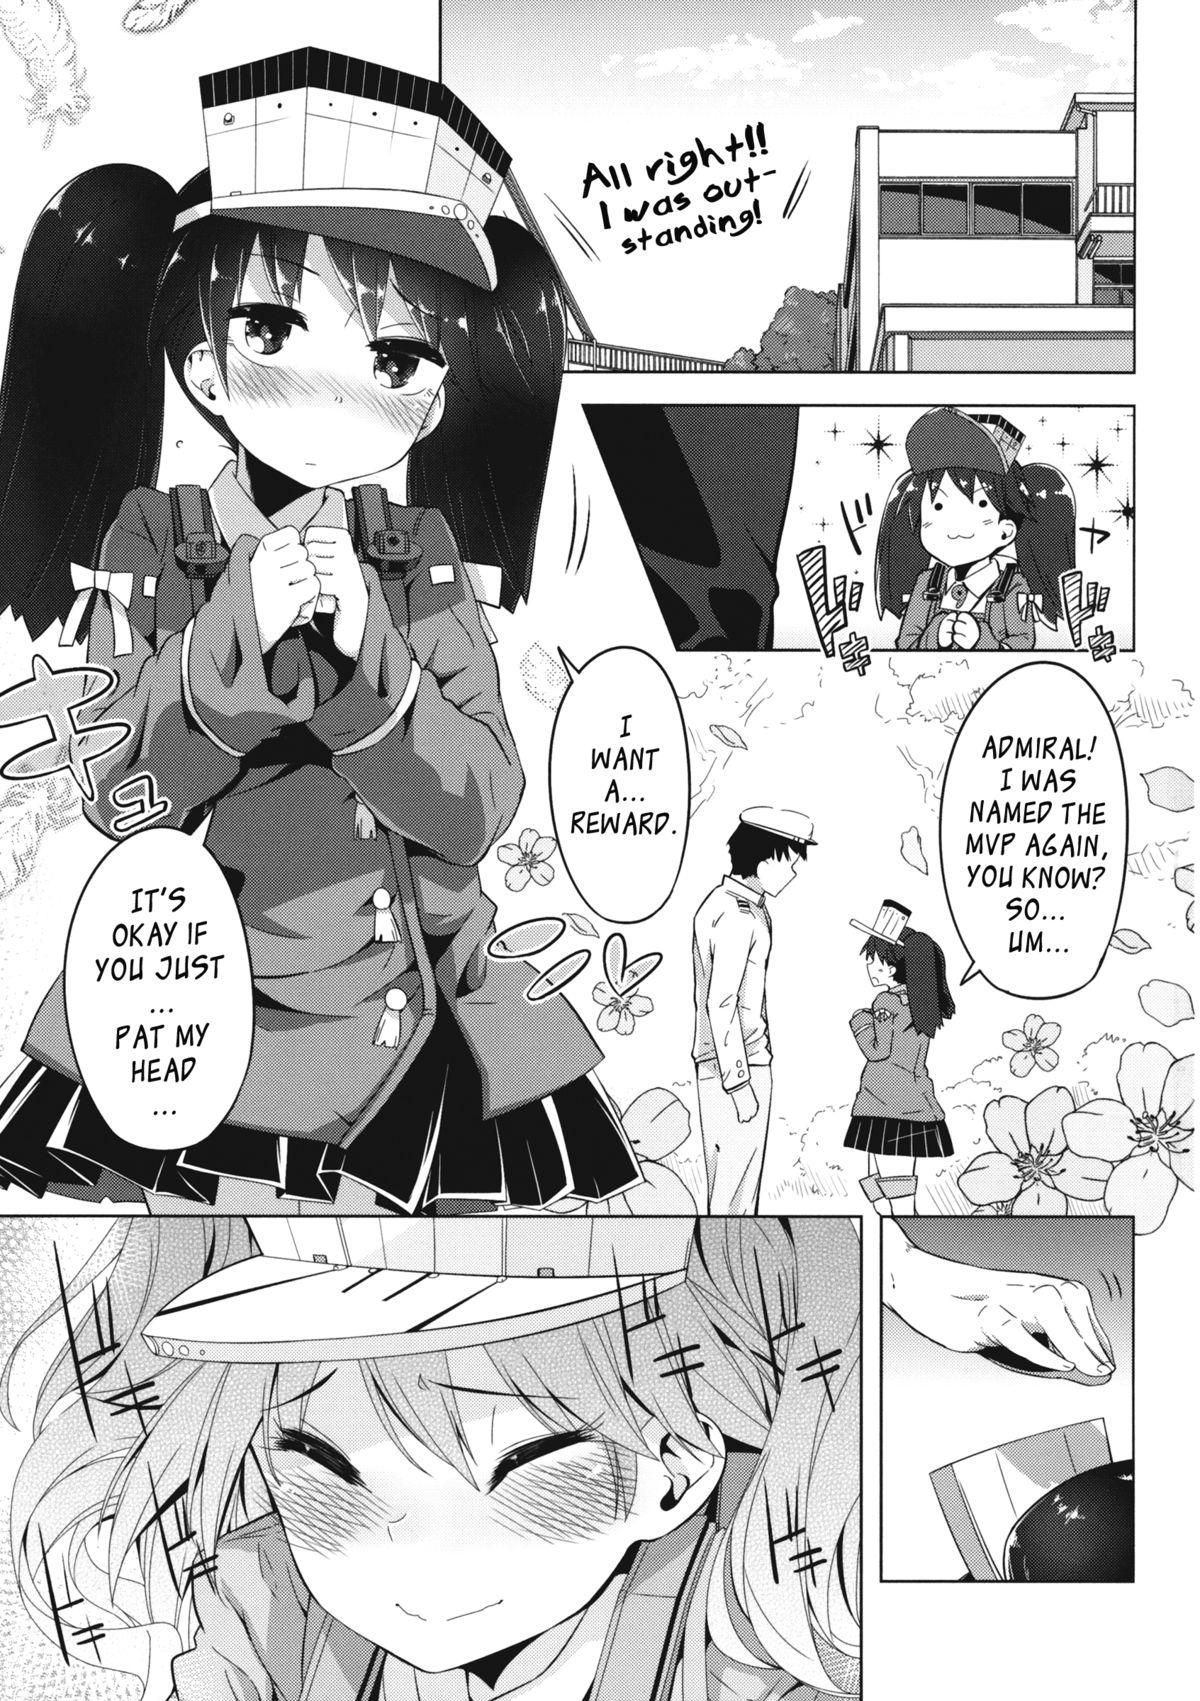 Female Koi suru Otome no Miryoku wa Mune dake janai! | The Allure of a Maiden in Love isn't Only in Her Chest! - Kantai collection Romantic - Page 2